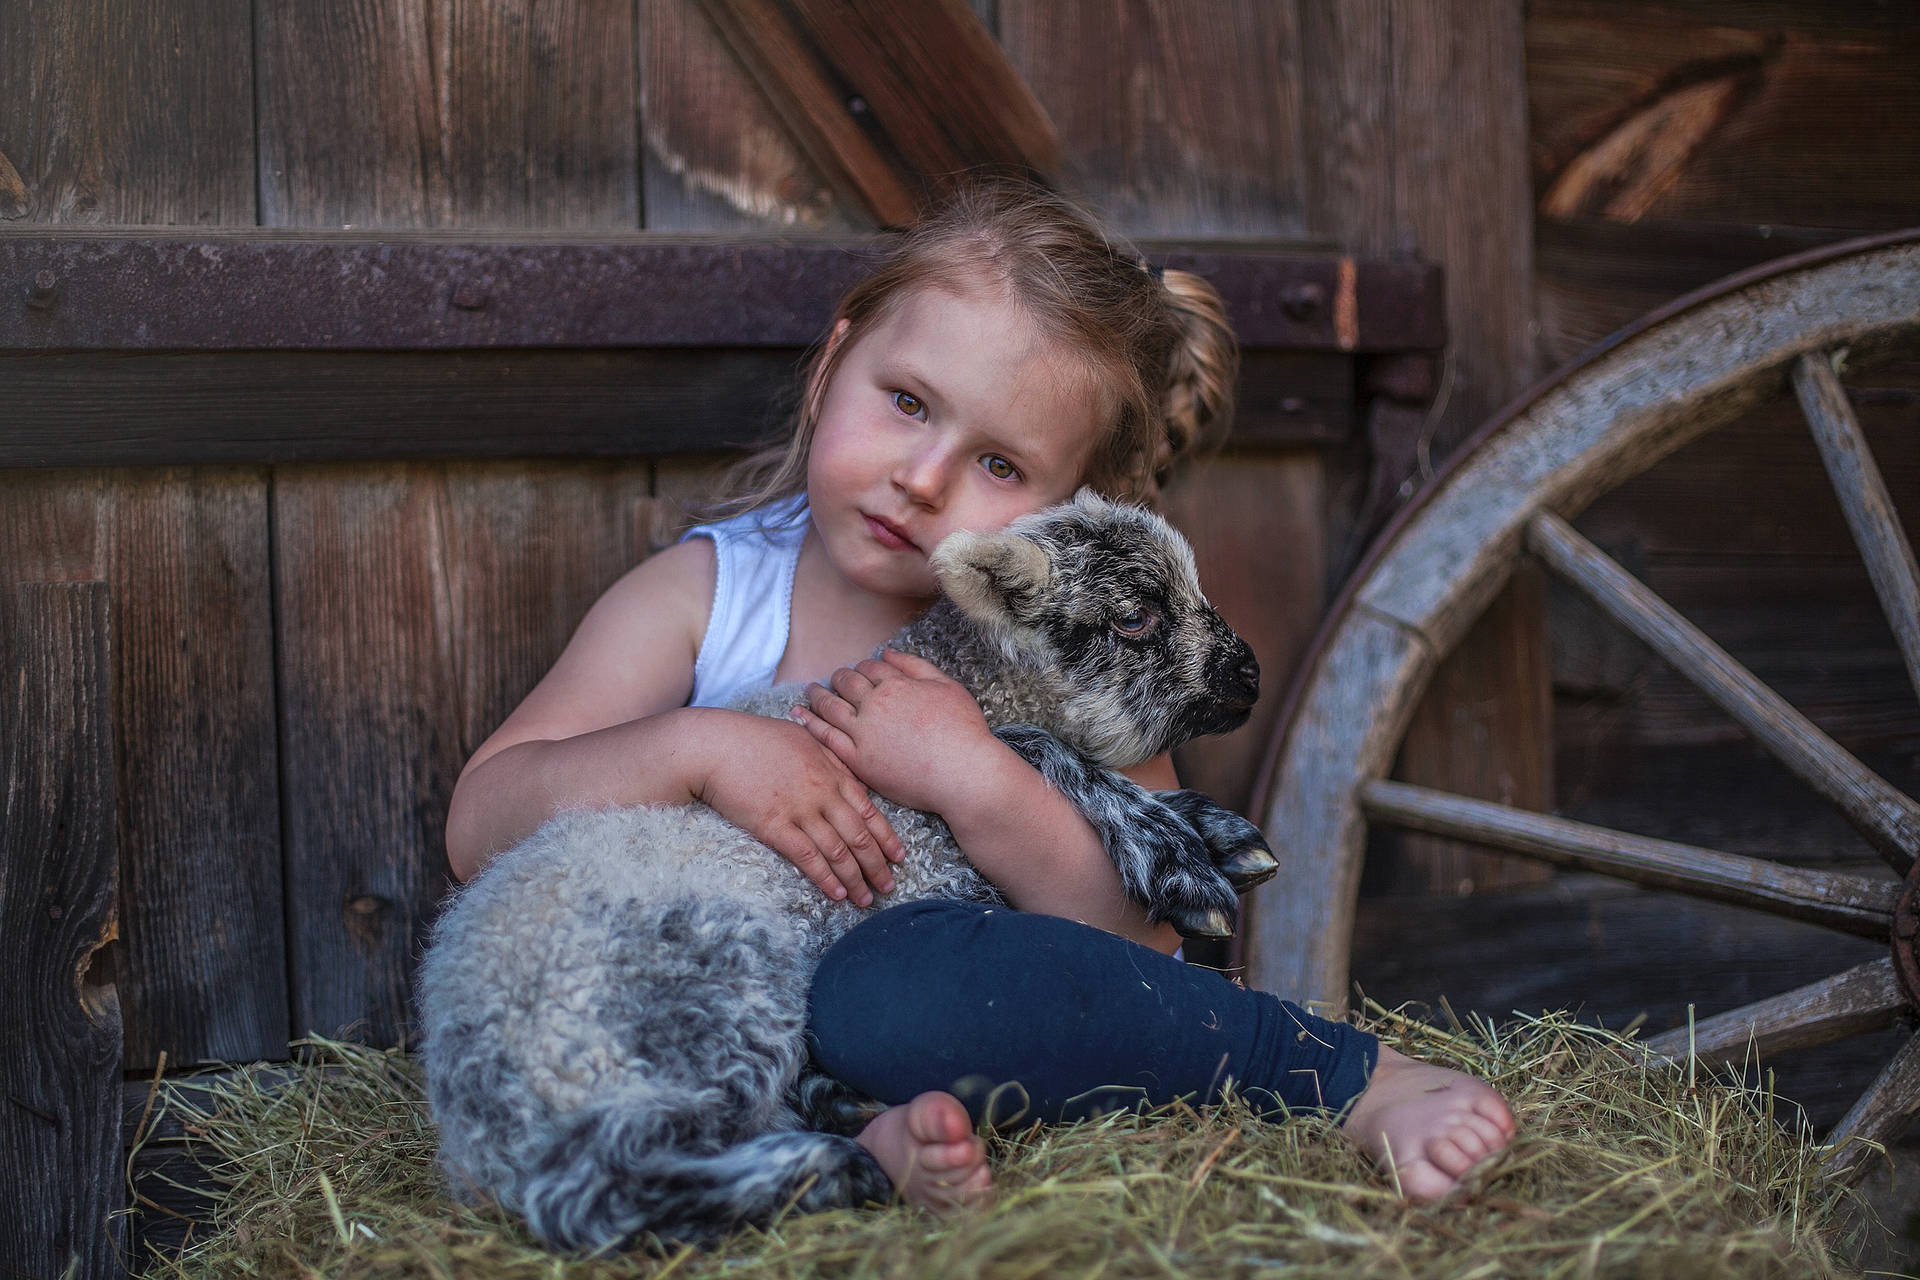 Adorable Girl Playing With Sheep In A Barn